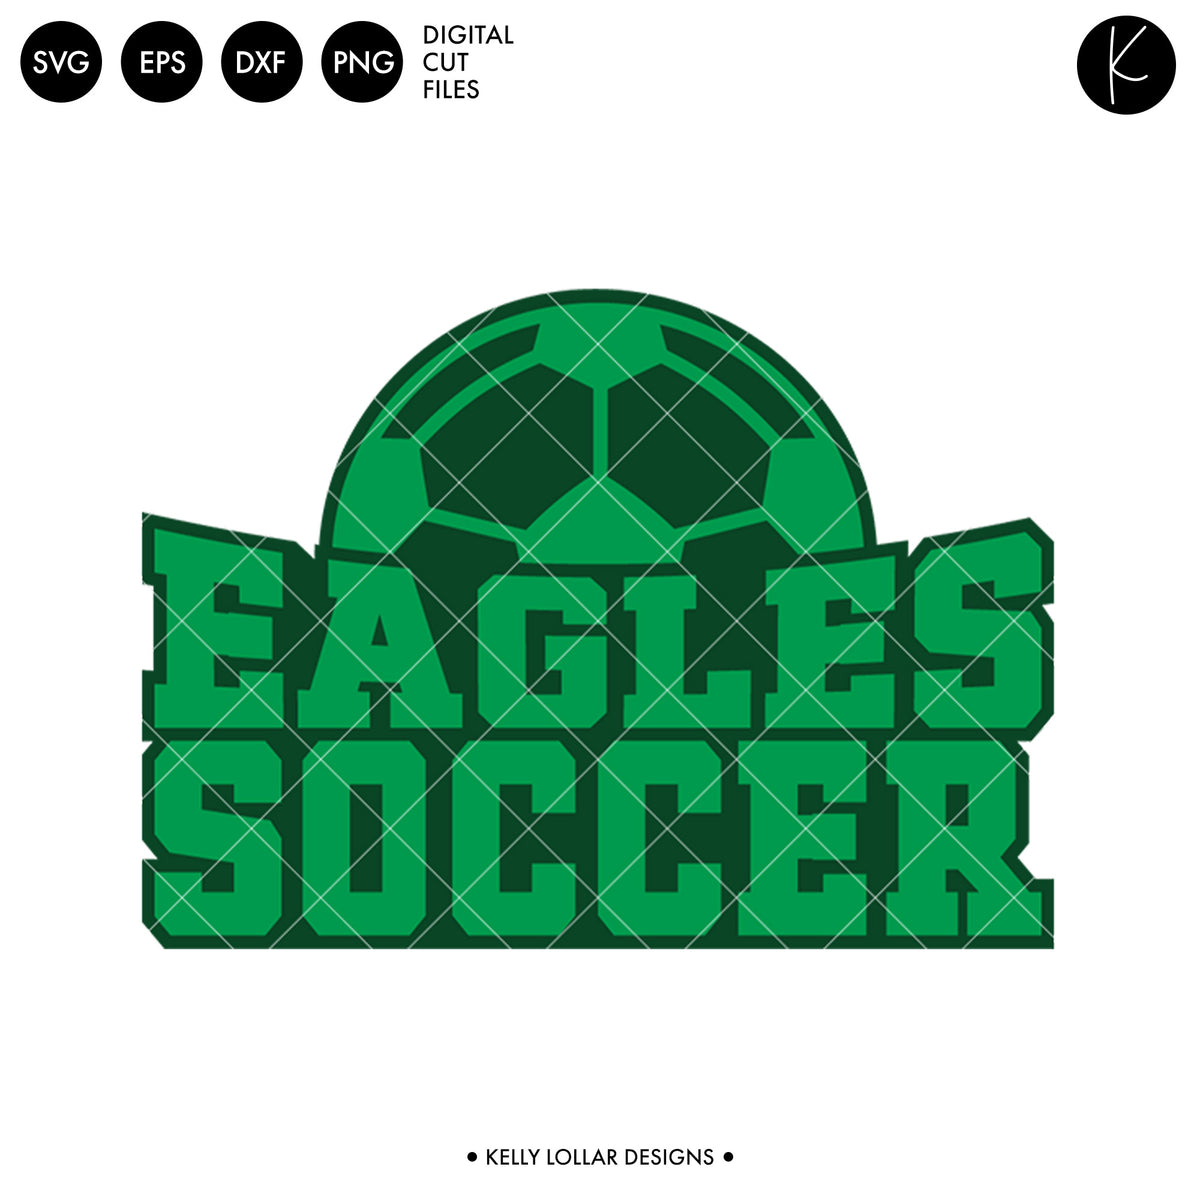 Eagles Soccer and Football Bundle | SVG DXF EPS PNG Cut Files